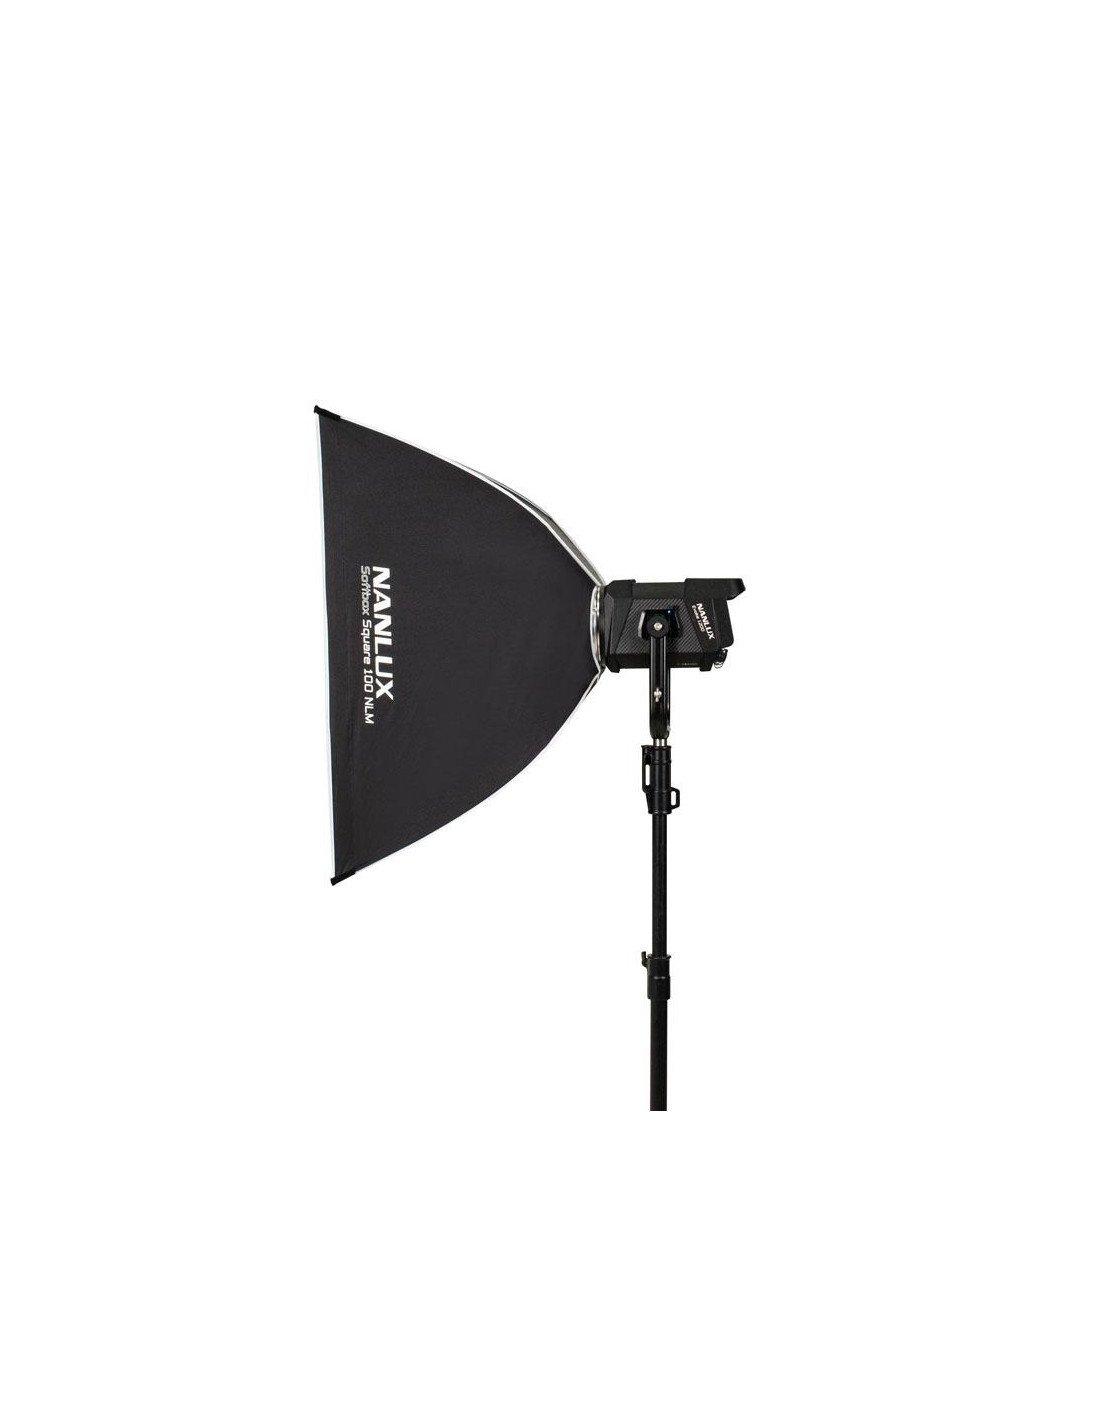 nanlux-square-softbox-100cm-with-nlm-mount vista-lateral